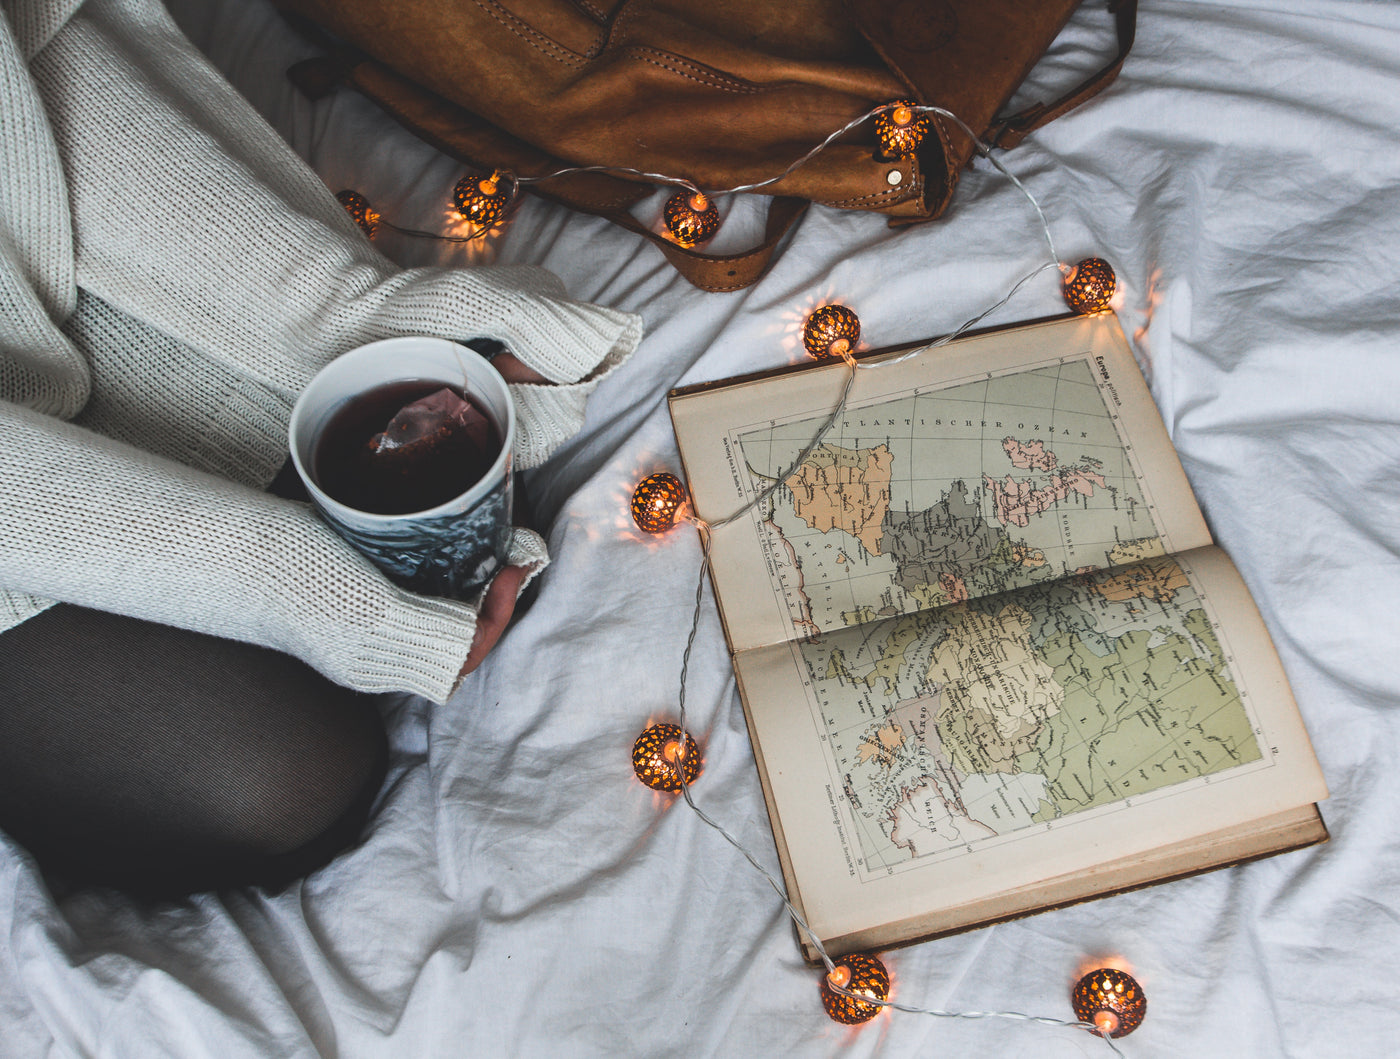 Which means that the travelers in your life could benefit from new and better cozy gear for their upcoming trips. The best travel gifts are often the most practical.  These options offer sensible 'comfy-cozy' ways to gift the traveler that you know. 